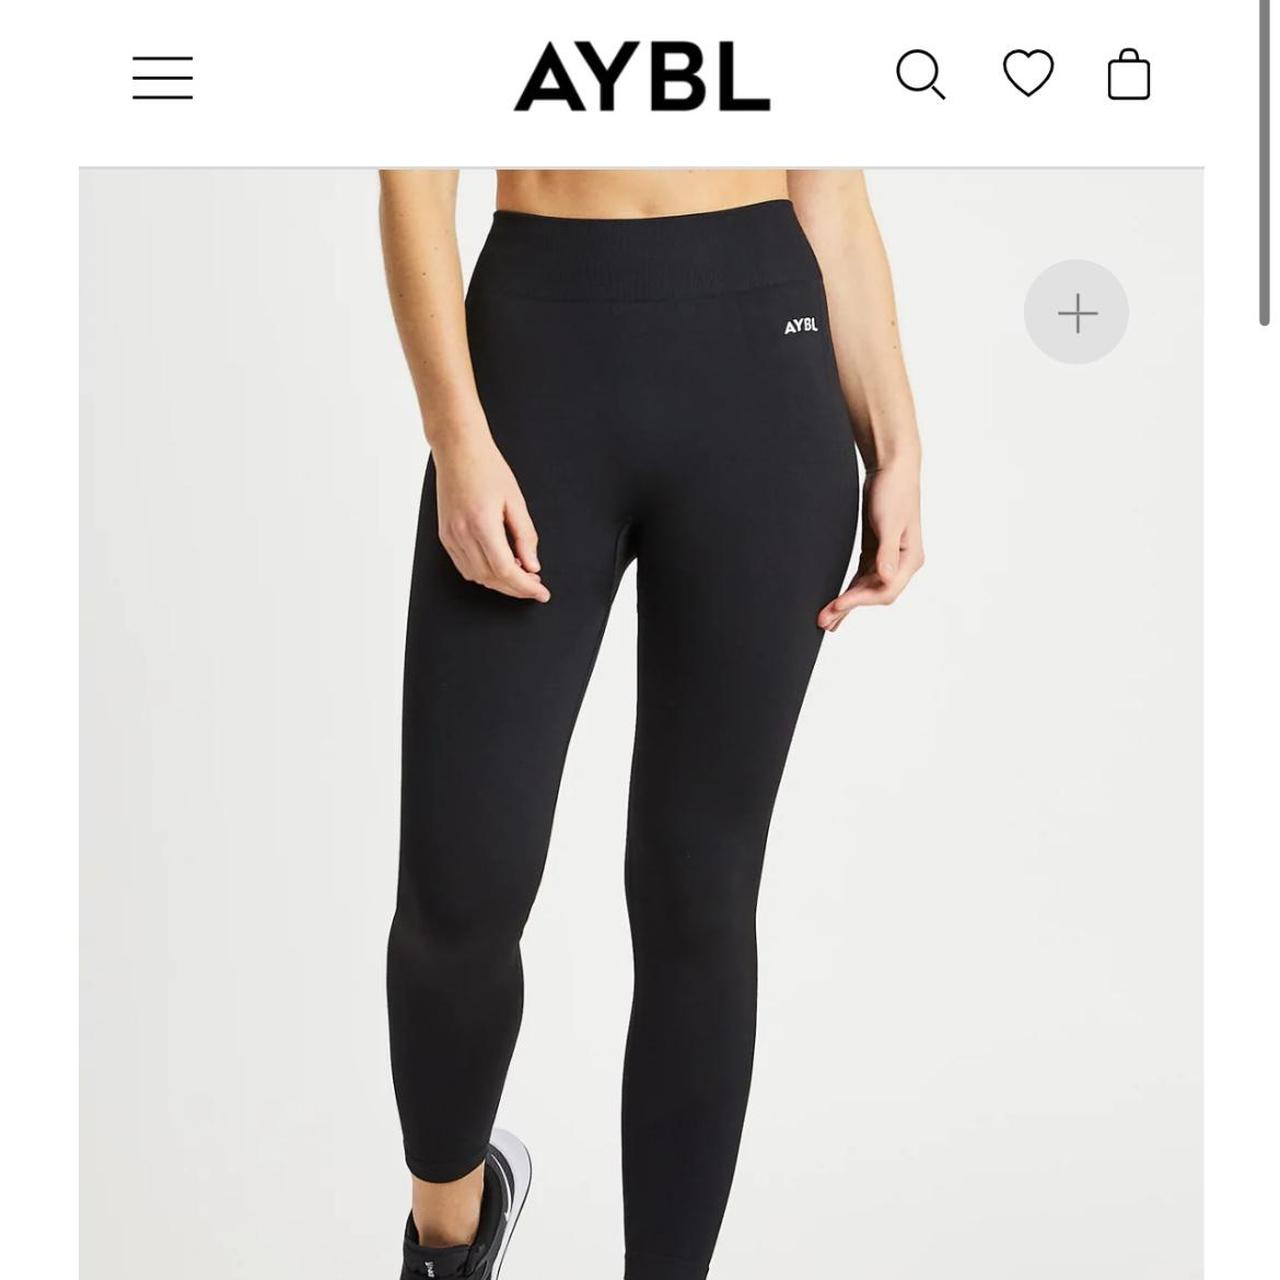 AYBL Gym leggins low rise Never used Size: Small - Depop